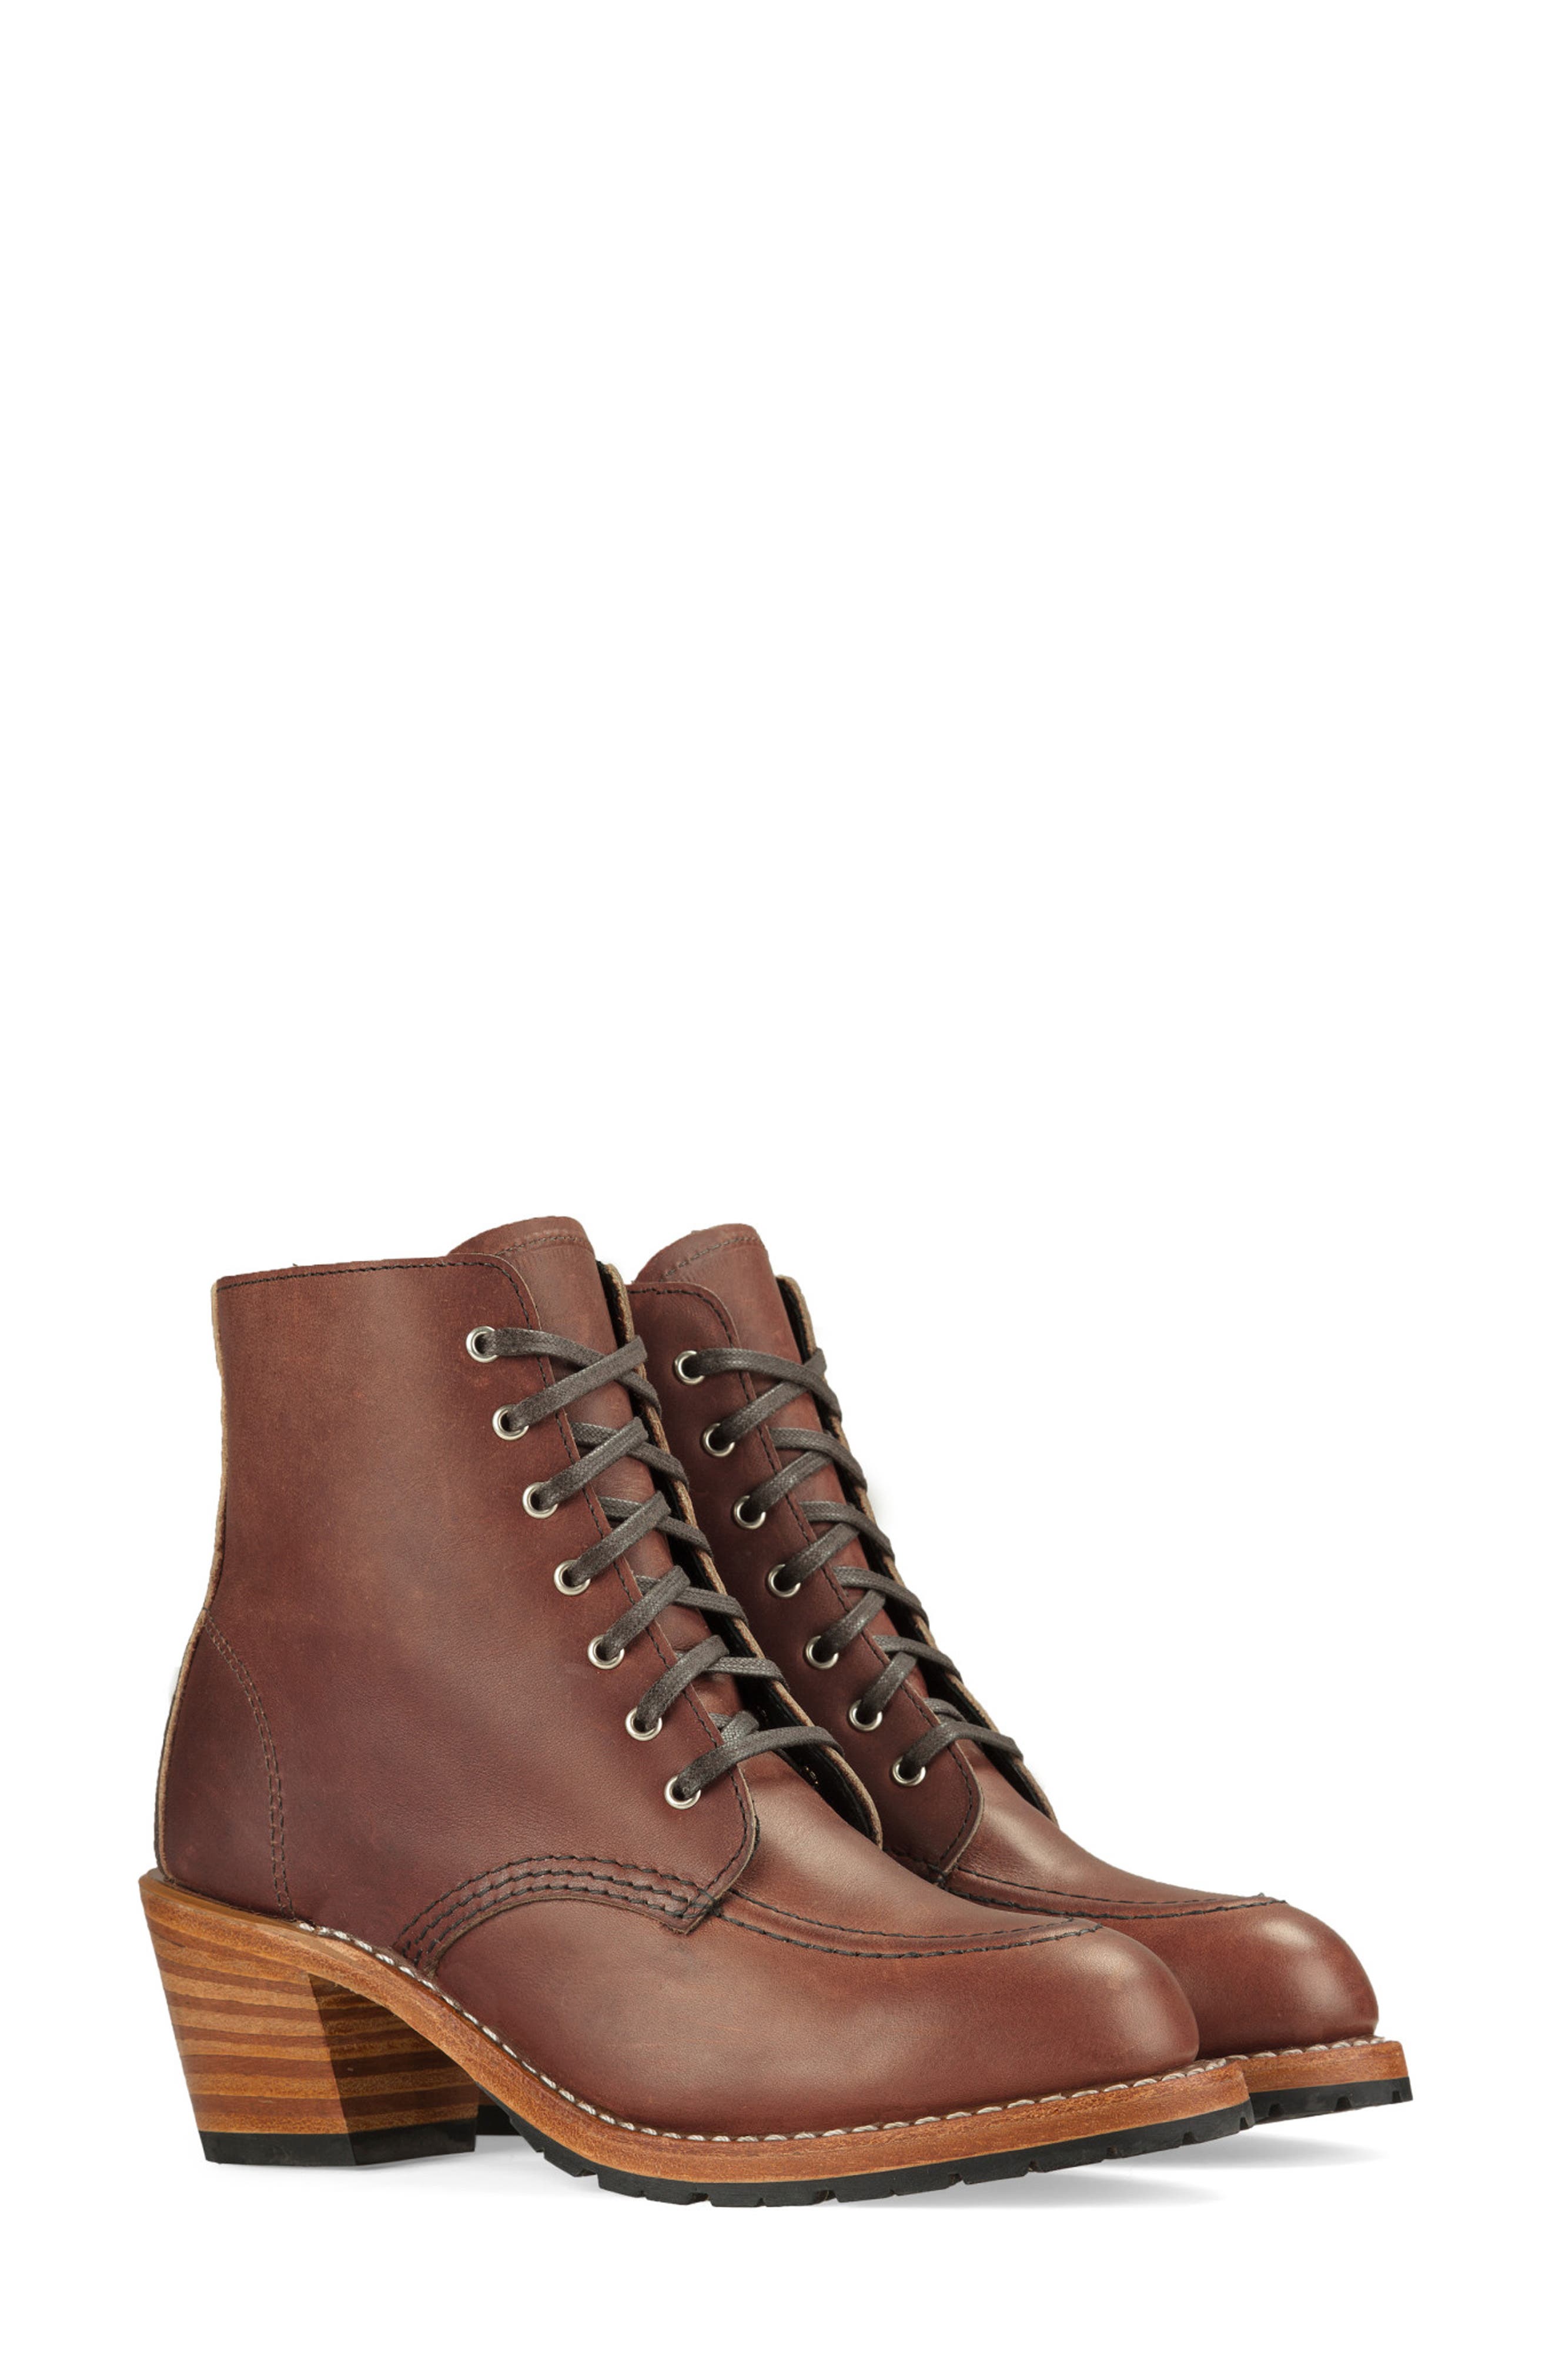 red wing clara boots sale